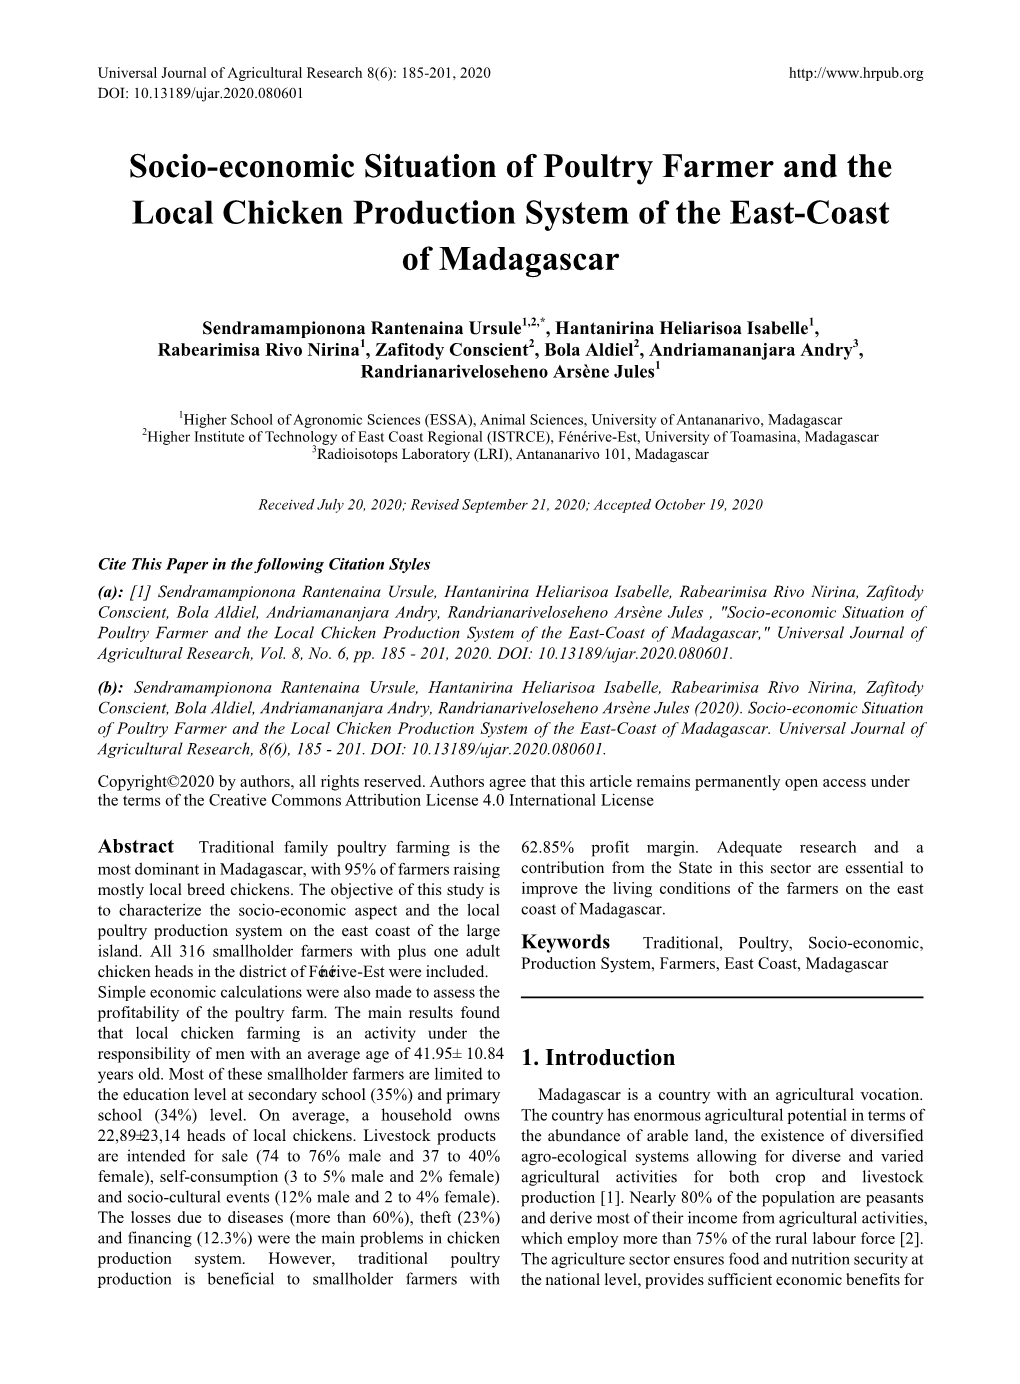 Socio-Economic Situation of Poultry Farmer and the Local Chicken Production System of the East-Coast of Madagascar